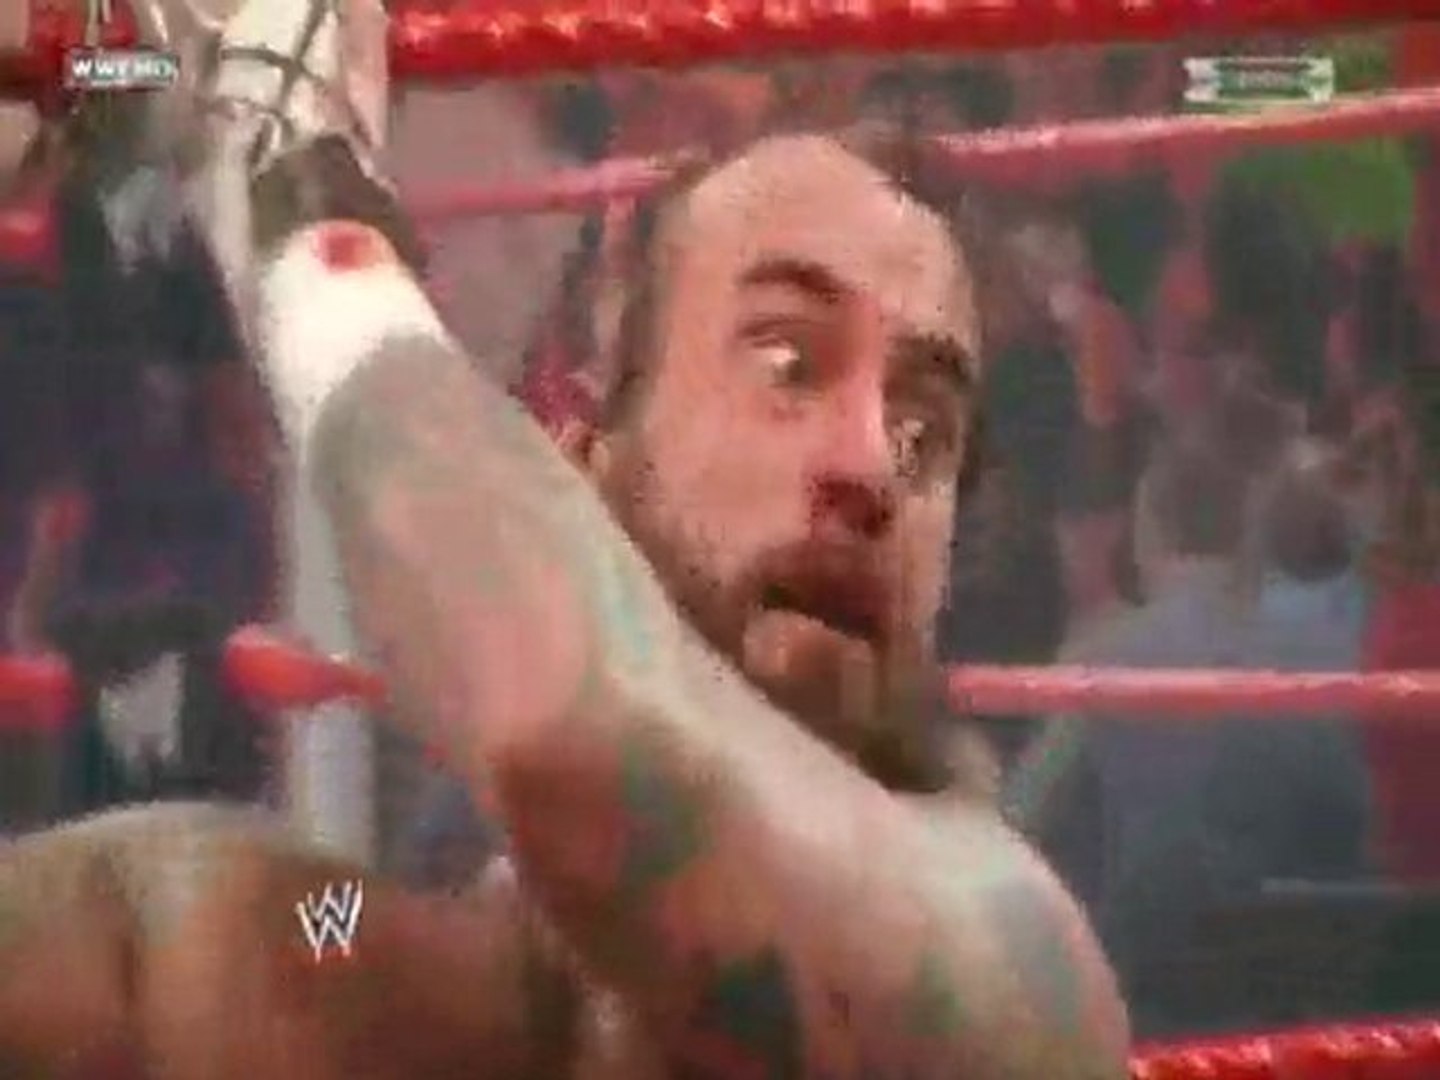 Over the Limit 2010 Cm Punk was doing shaving - Vidéo Dailymotion